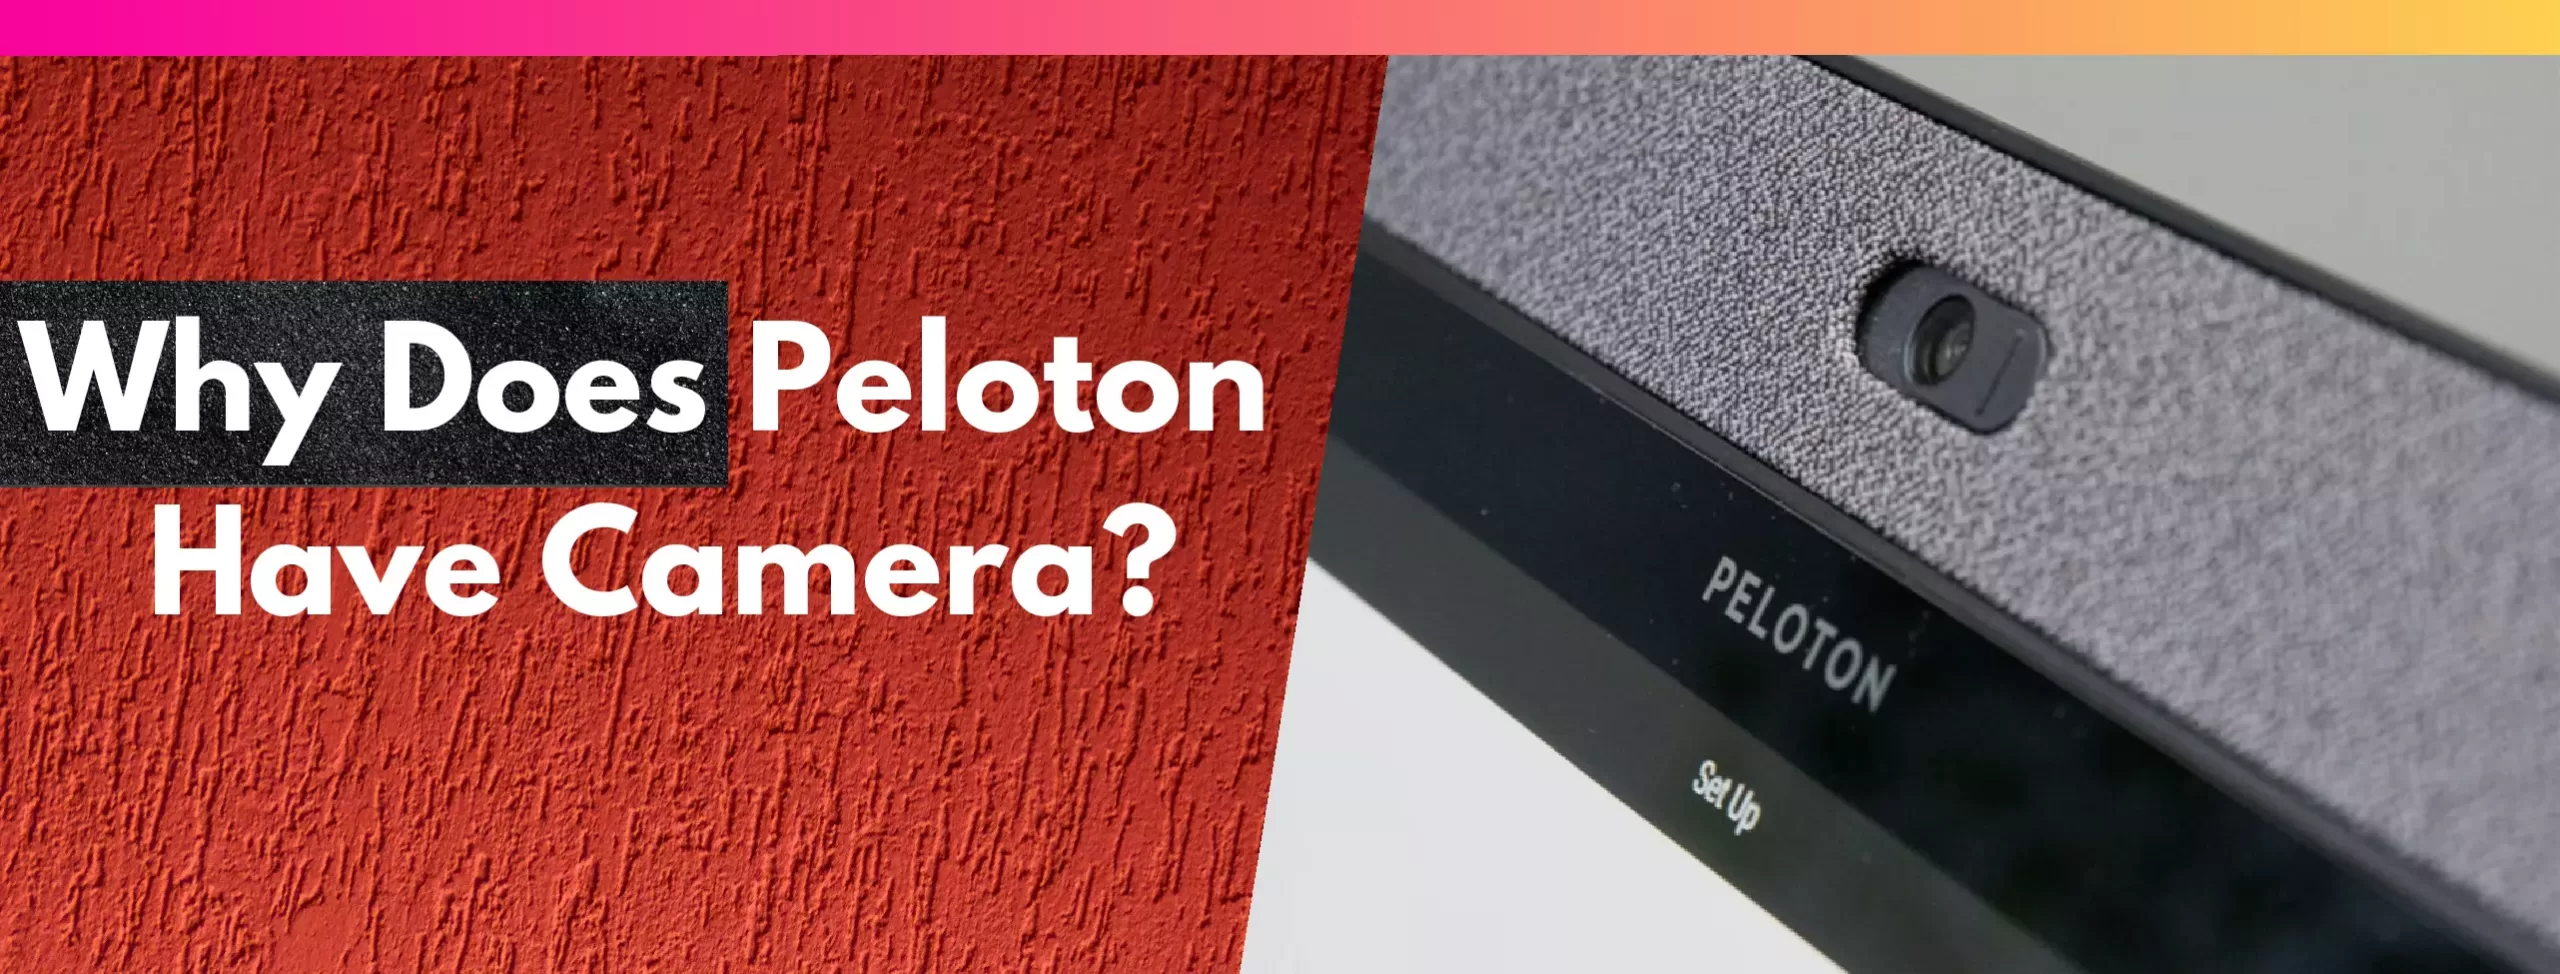 Why Does Peloton Have Camera scaled